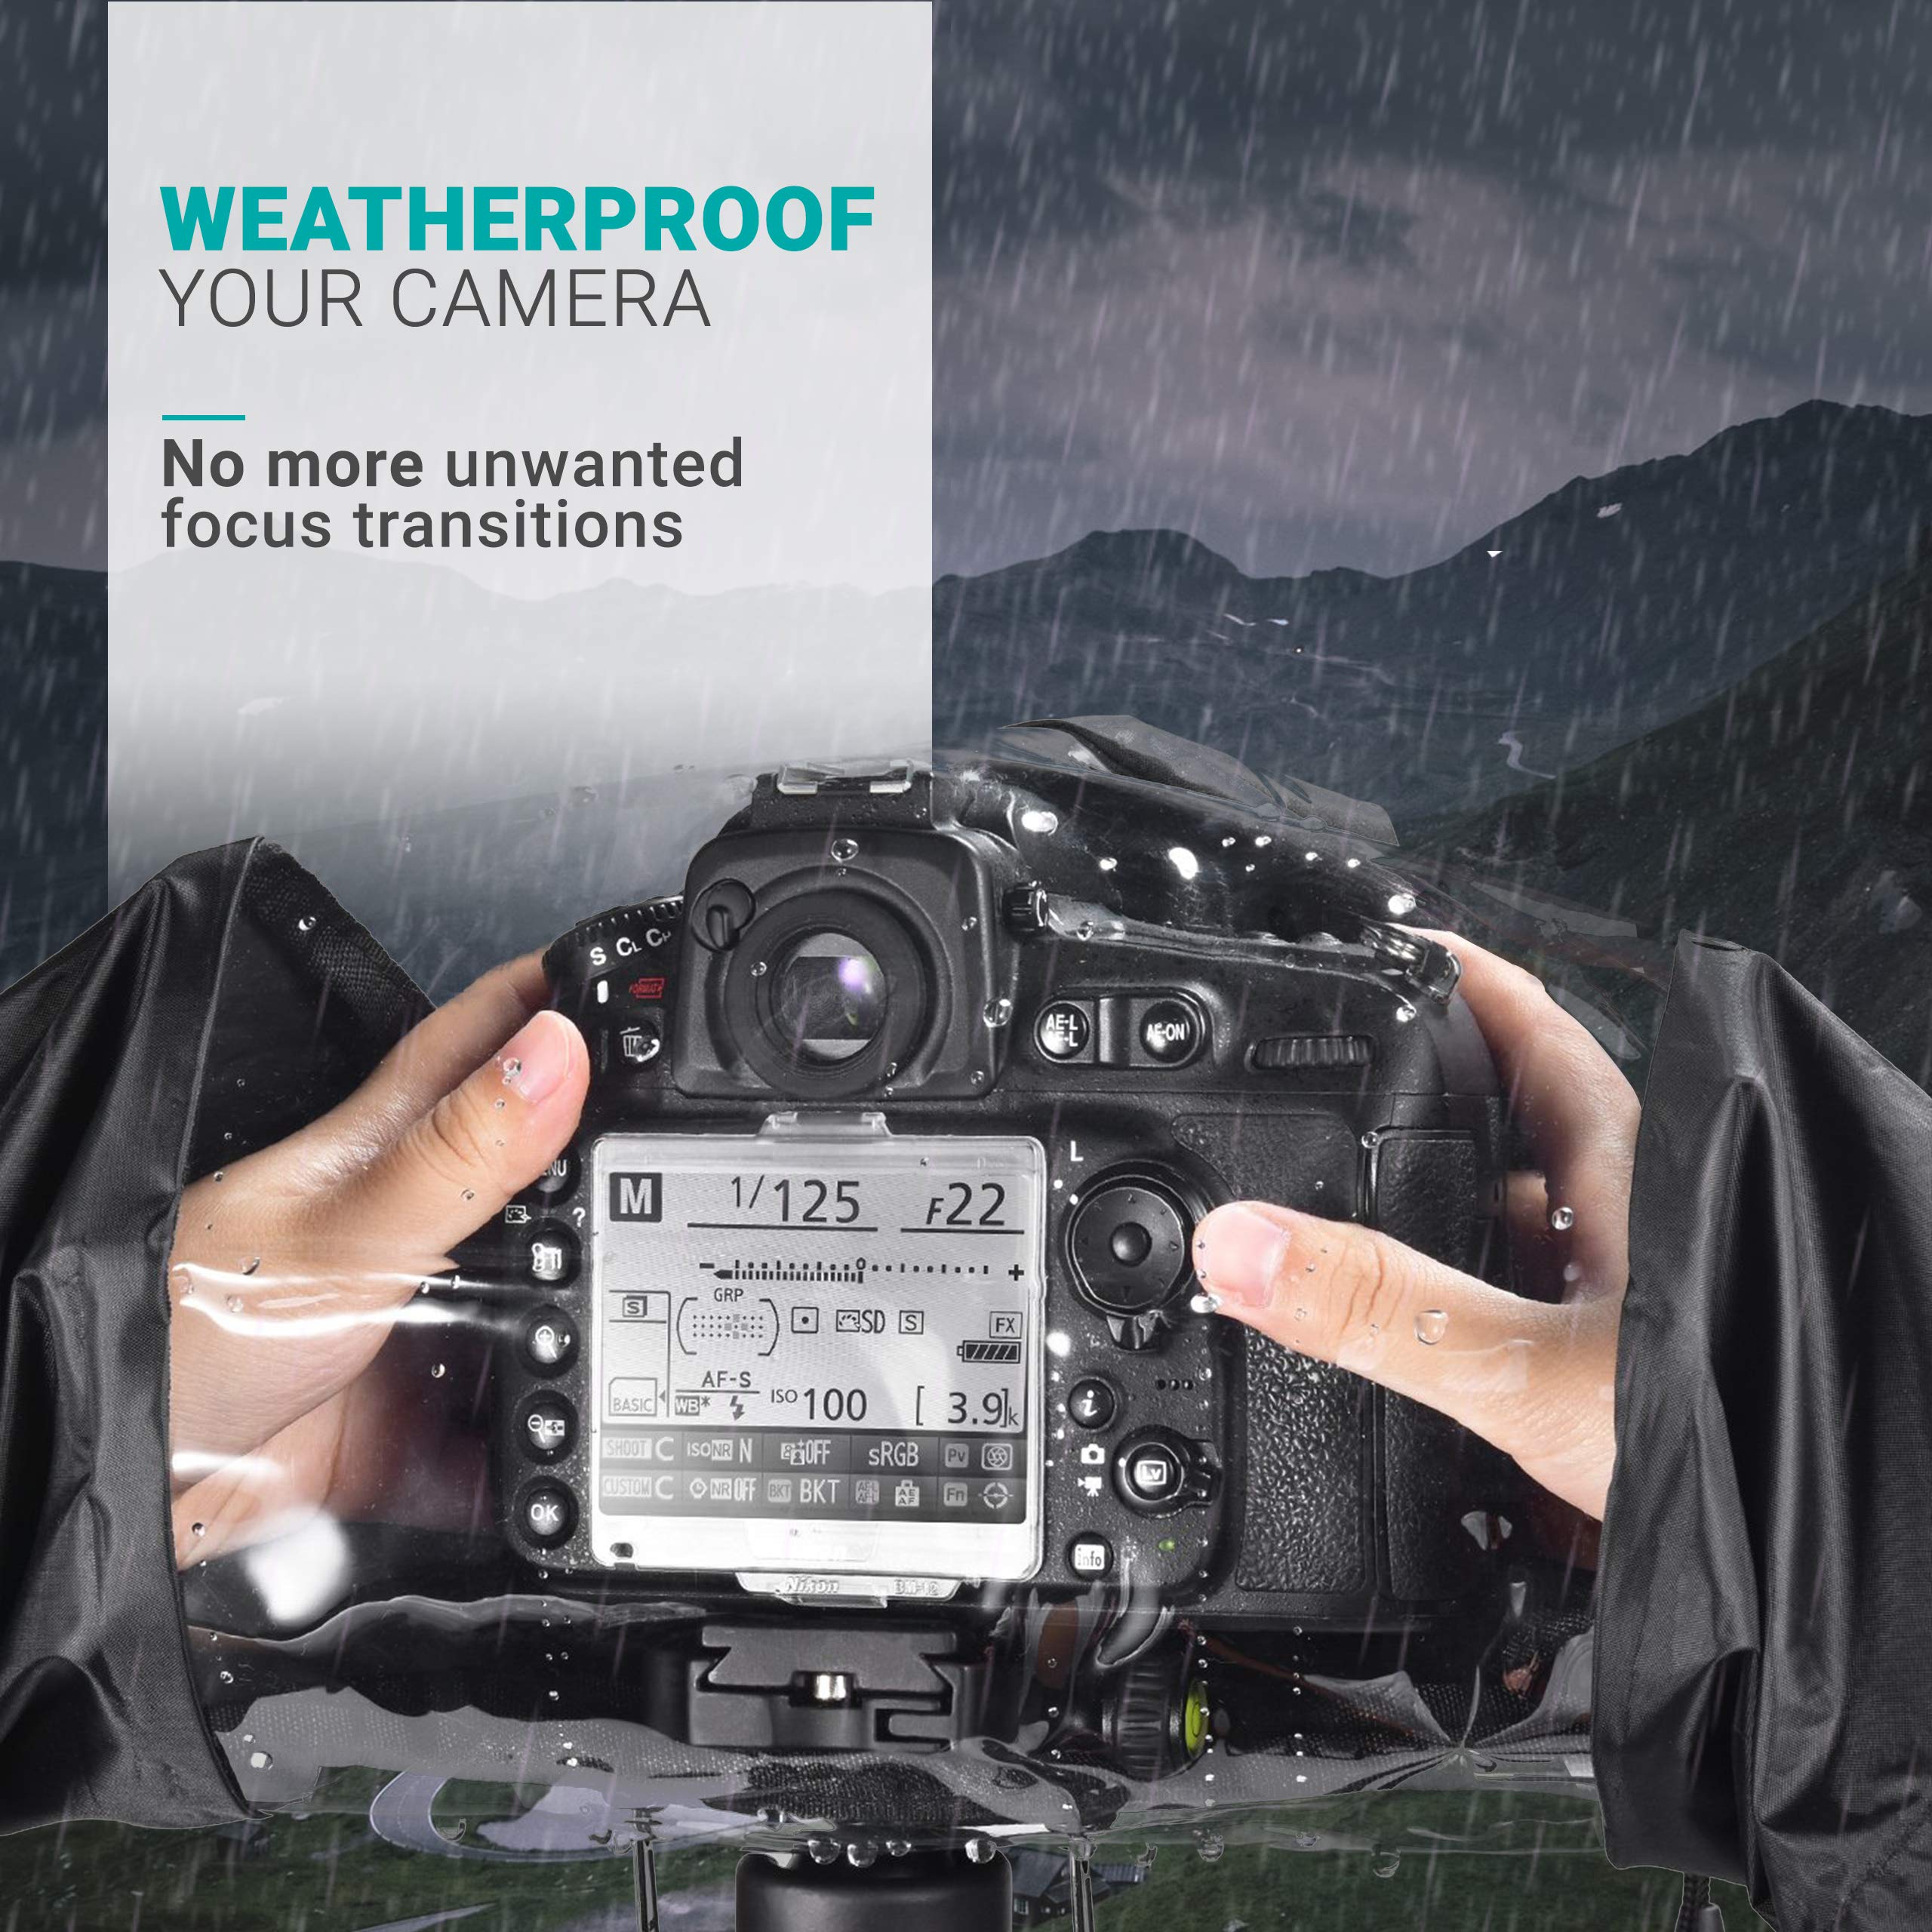 Movo CRC01 Waterproof Nylon Camera Rain Cover with Enclosed Hand Sleeves Compatible with Canon EOS, Nikon, Sony, Olympus, Pentax and Panasonic DSLR Cameras  - Like New